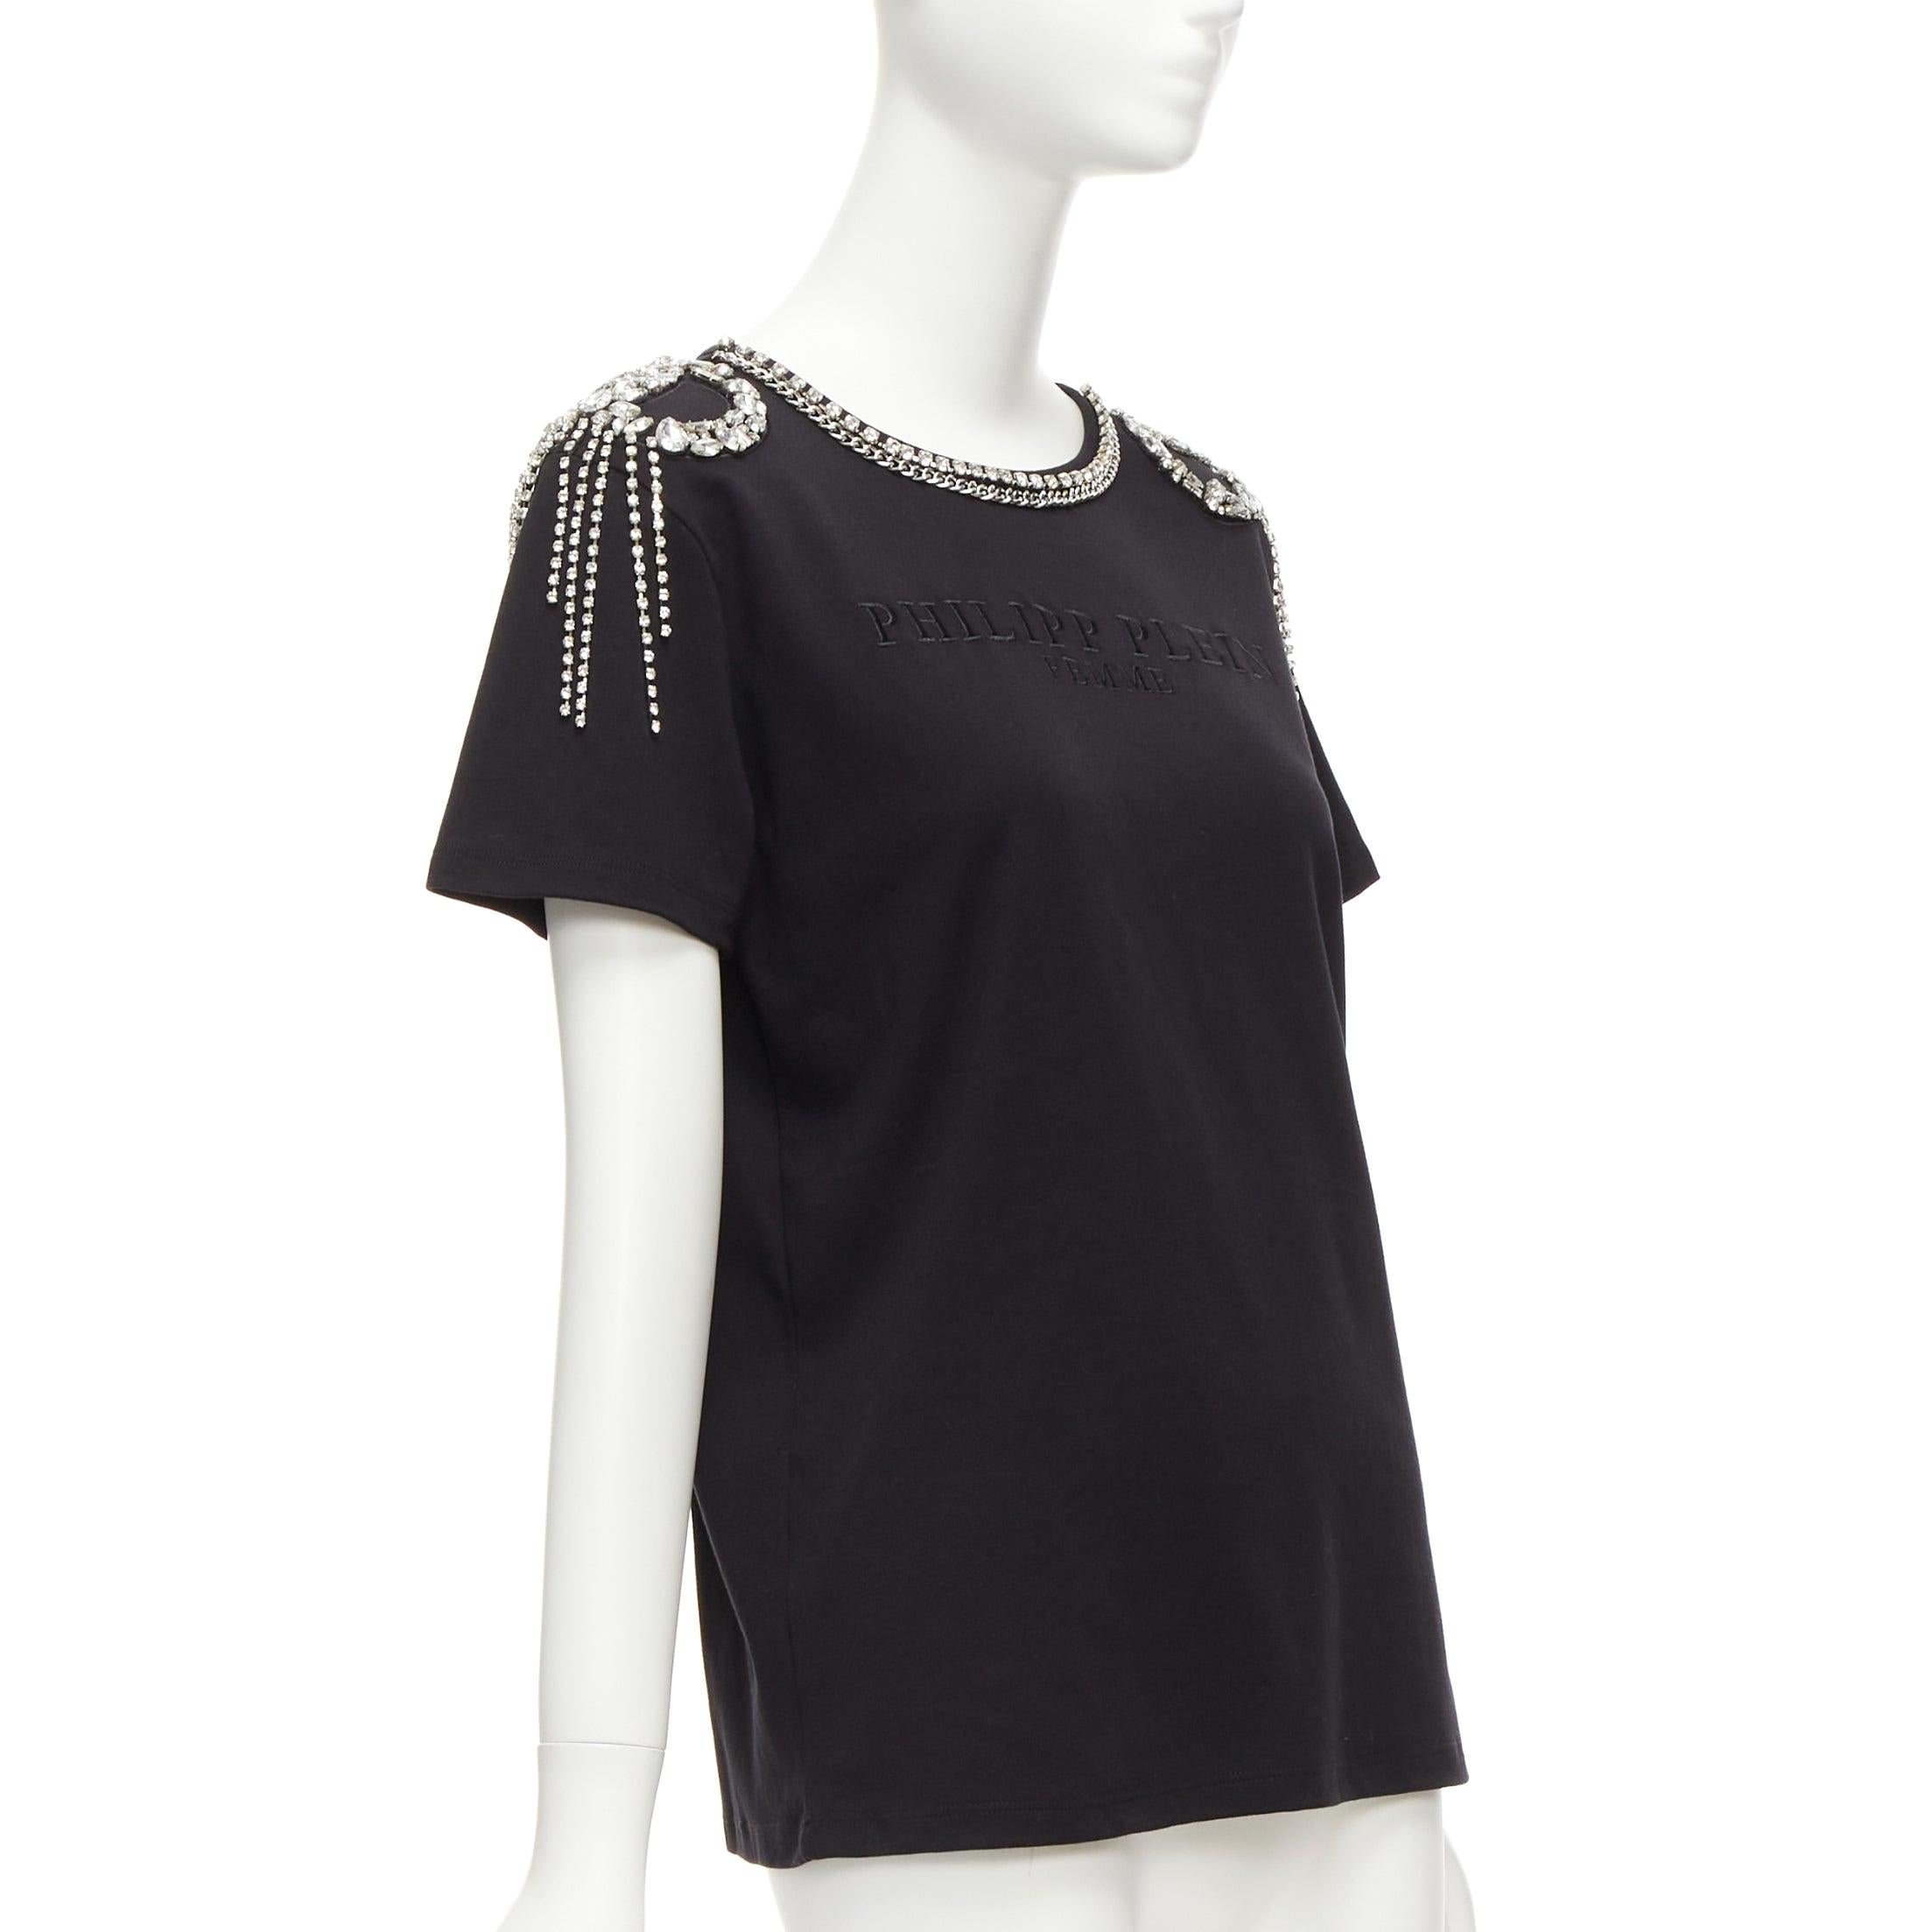 PHILLIP PLEIN FEMME black logo embroidery clear crystal fringe embellished tshirt XS
Reference: AAWC/A00744
Brand: Phillip Plein
Collection: FEMME
Material: Cotton
Color: Black
Pattern: Solid
Closure: Slip On
Extra Details: PP logo tag at back.
Made